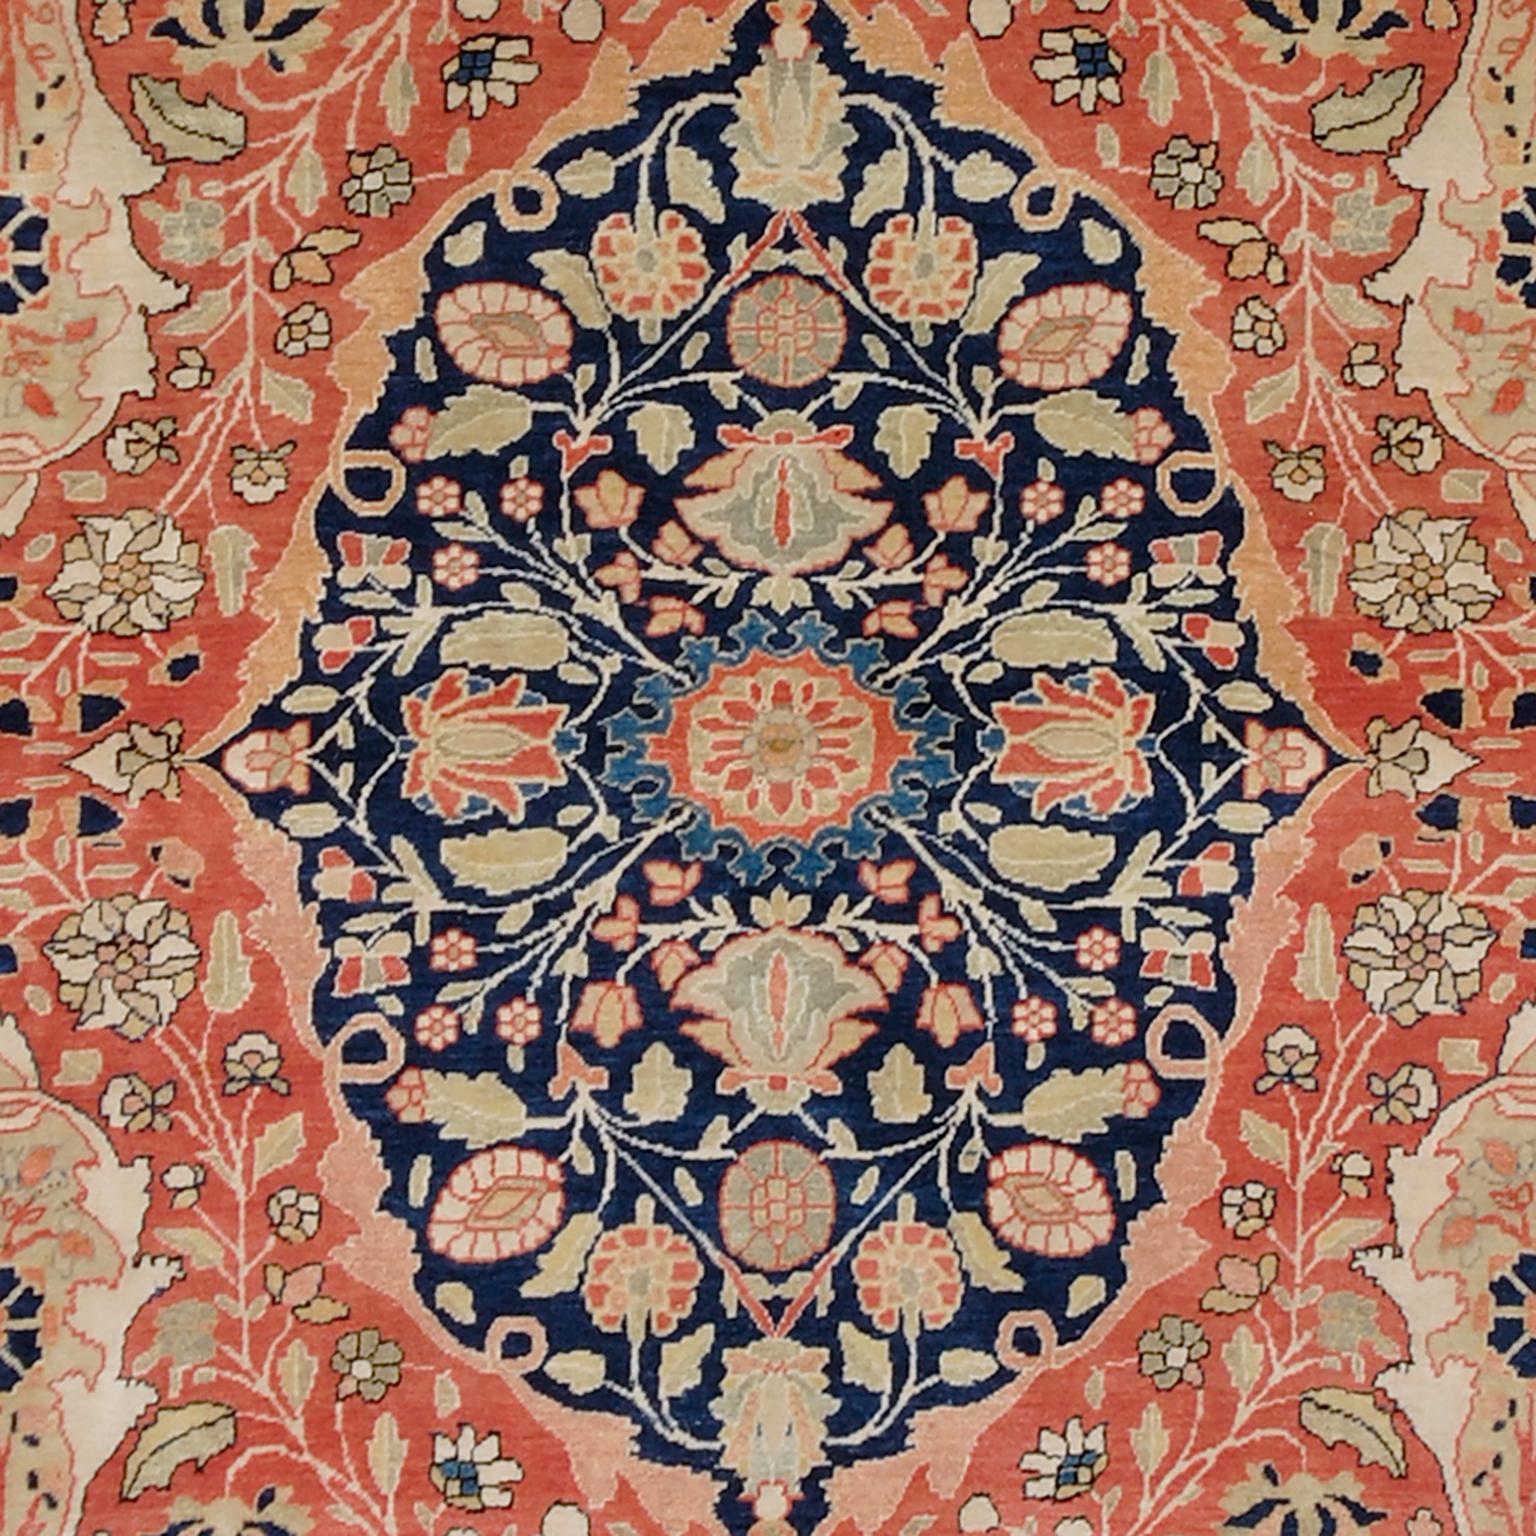 Hand-Woven Antique Persian Mohtasham Kashan Rug, 1880 For Sale